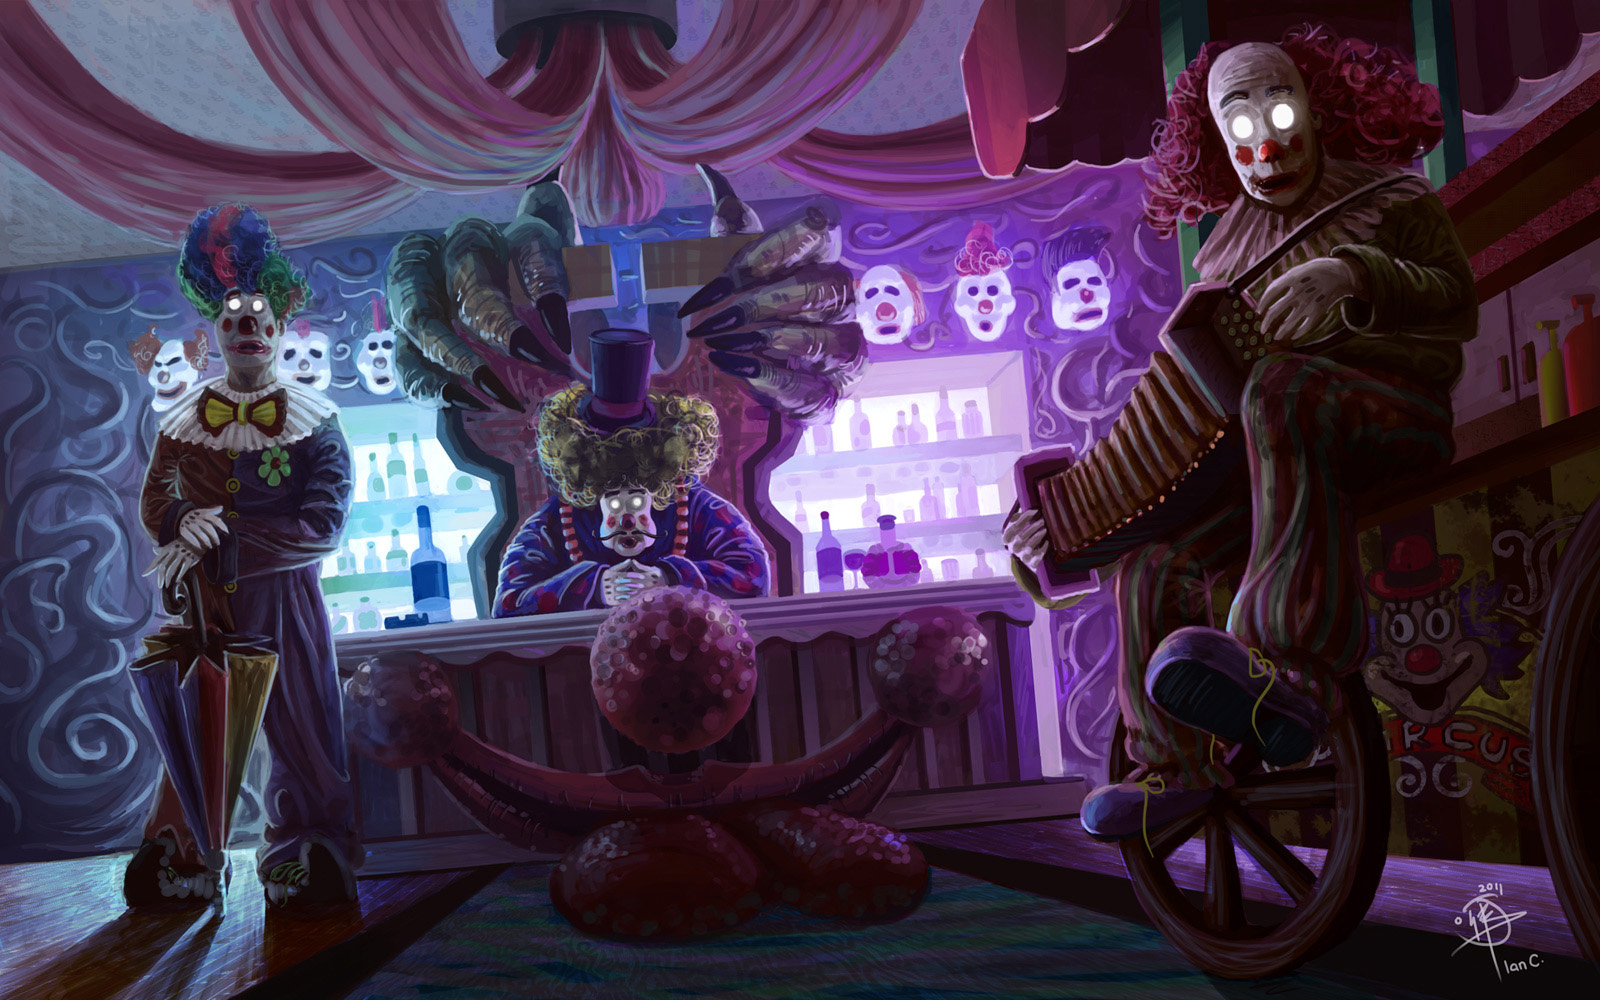 Clowns in a bar with a pink color scheme - Clown